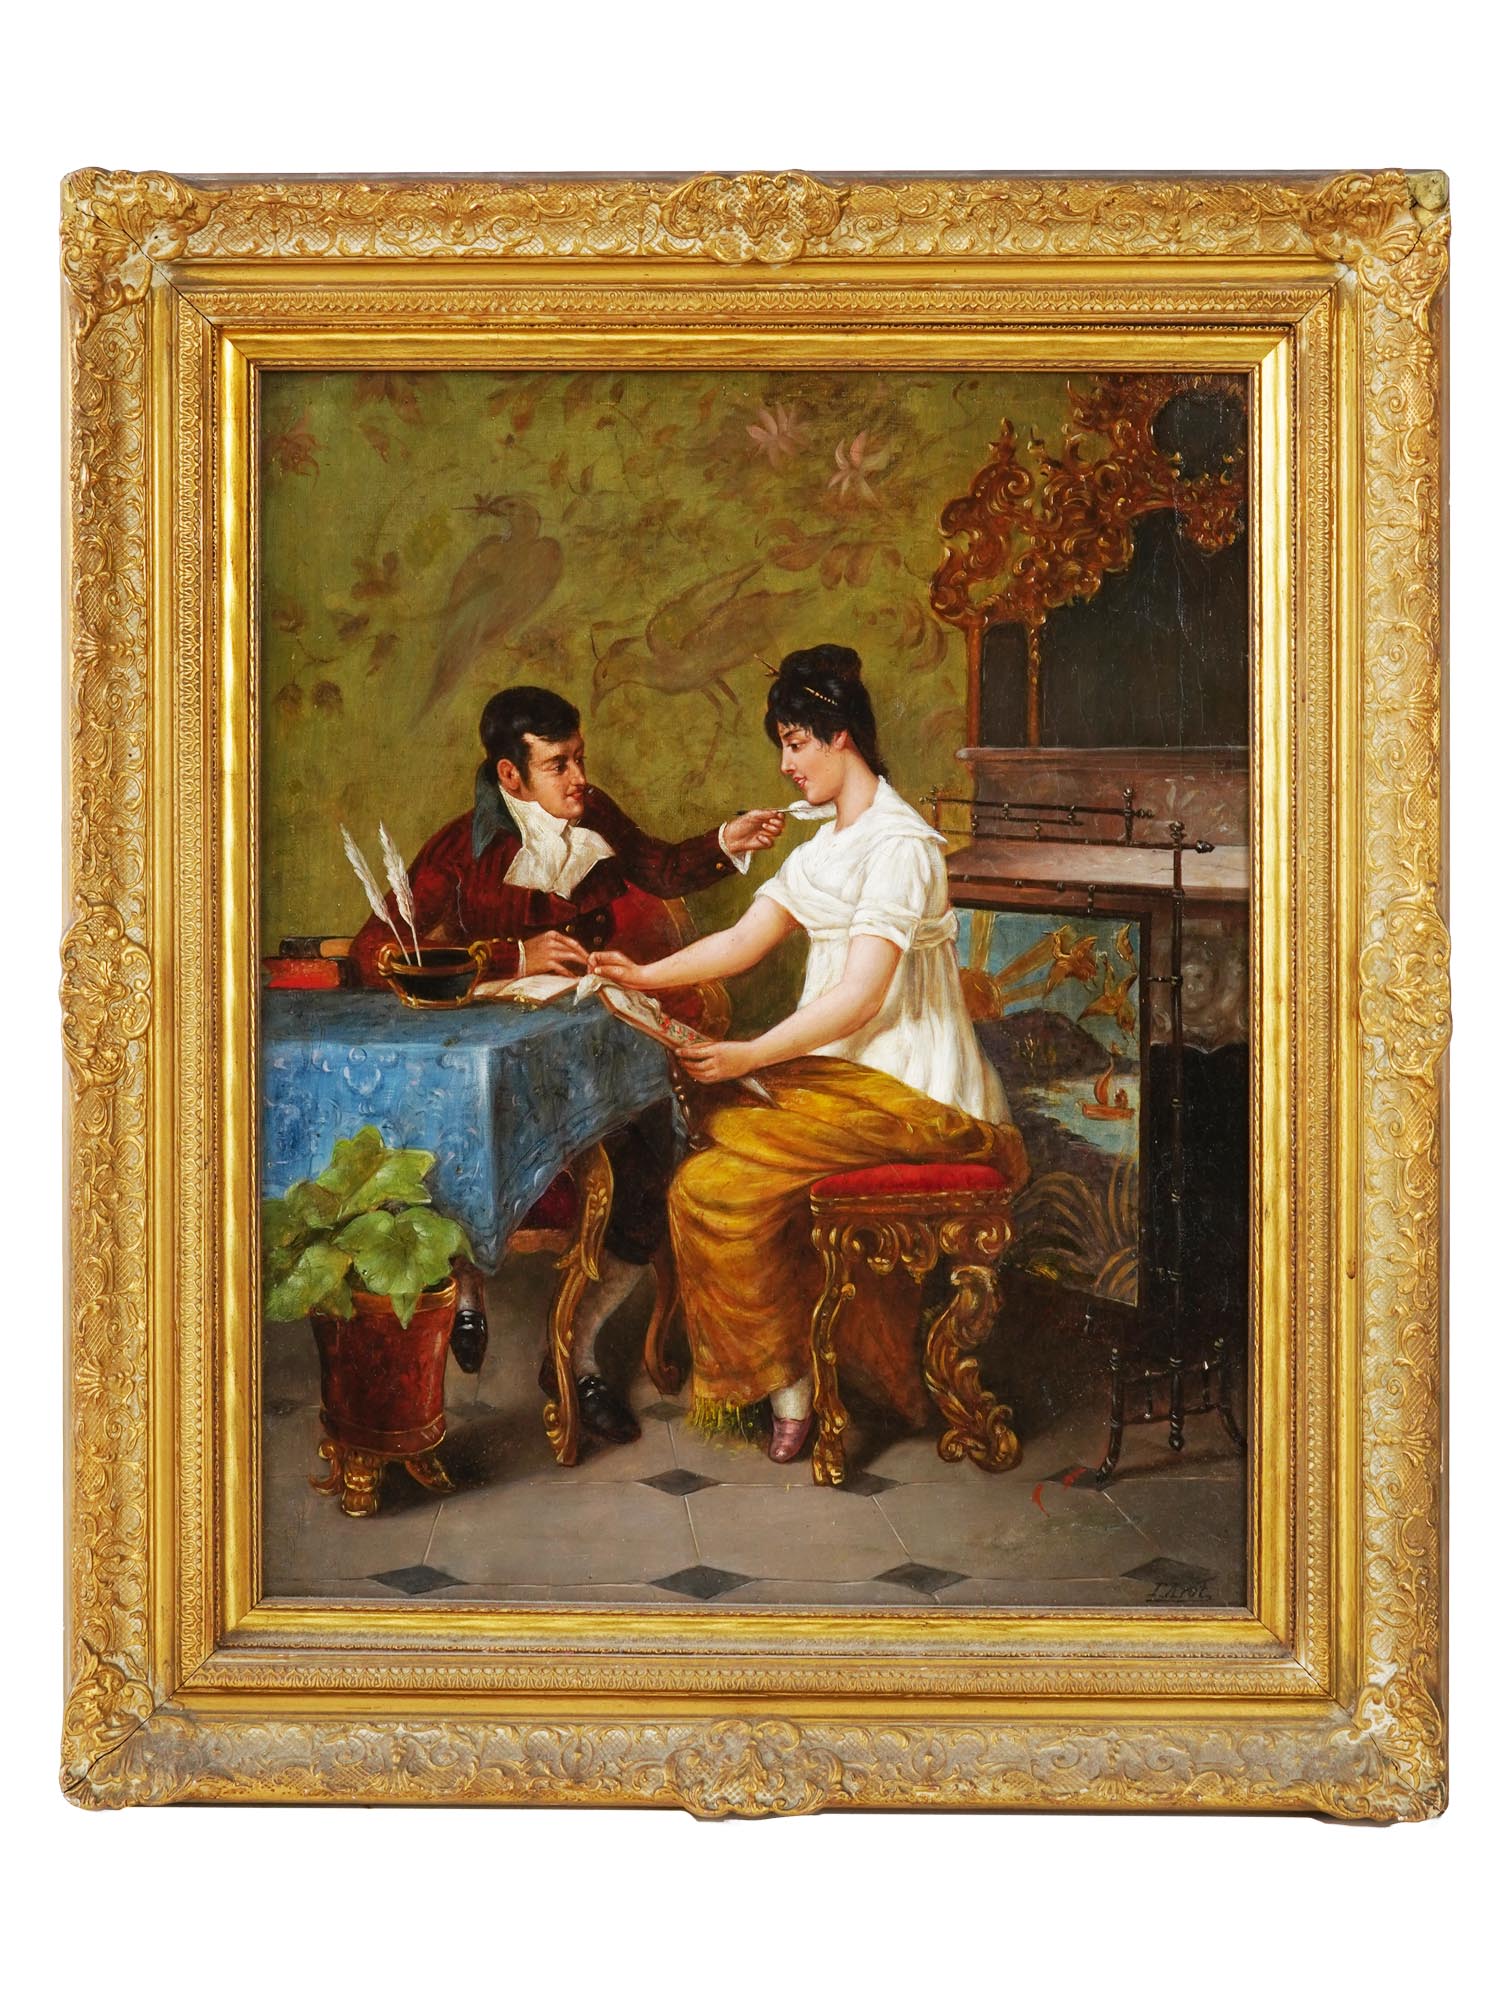 ANTIQUE OIL PAINTING COUPLE SIGNED BY THE ARTIST PIC-0